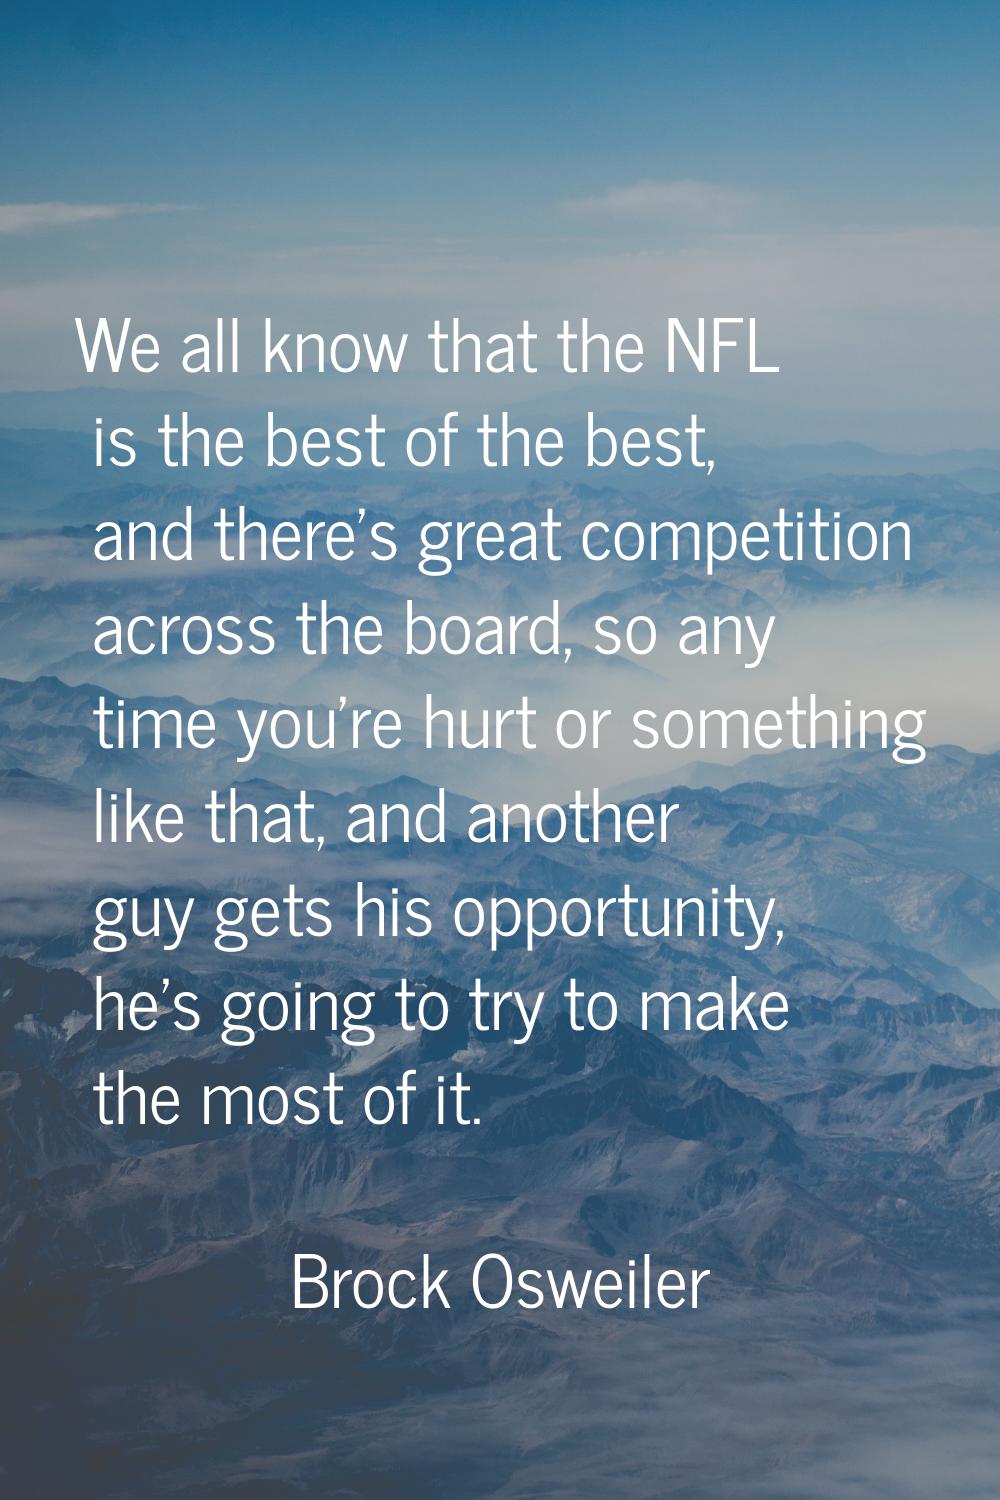 We all know that the NFL is the best of the best, and there's great competition across the board, s